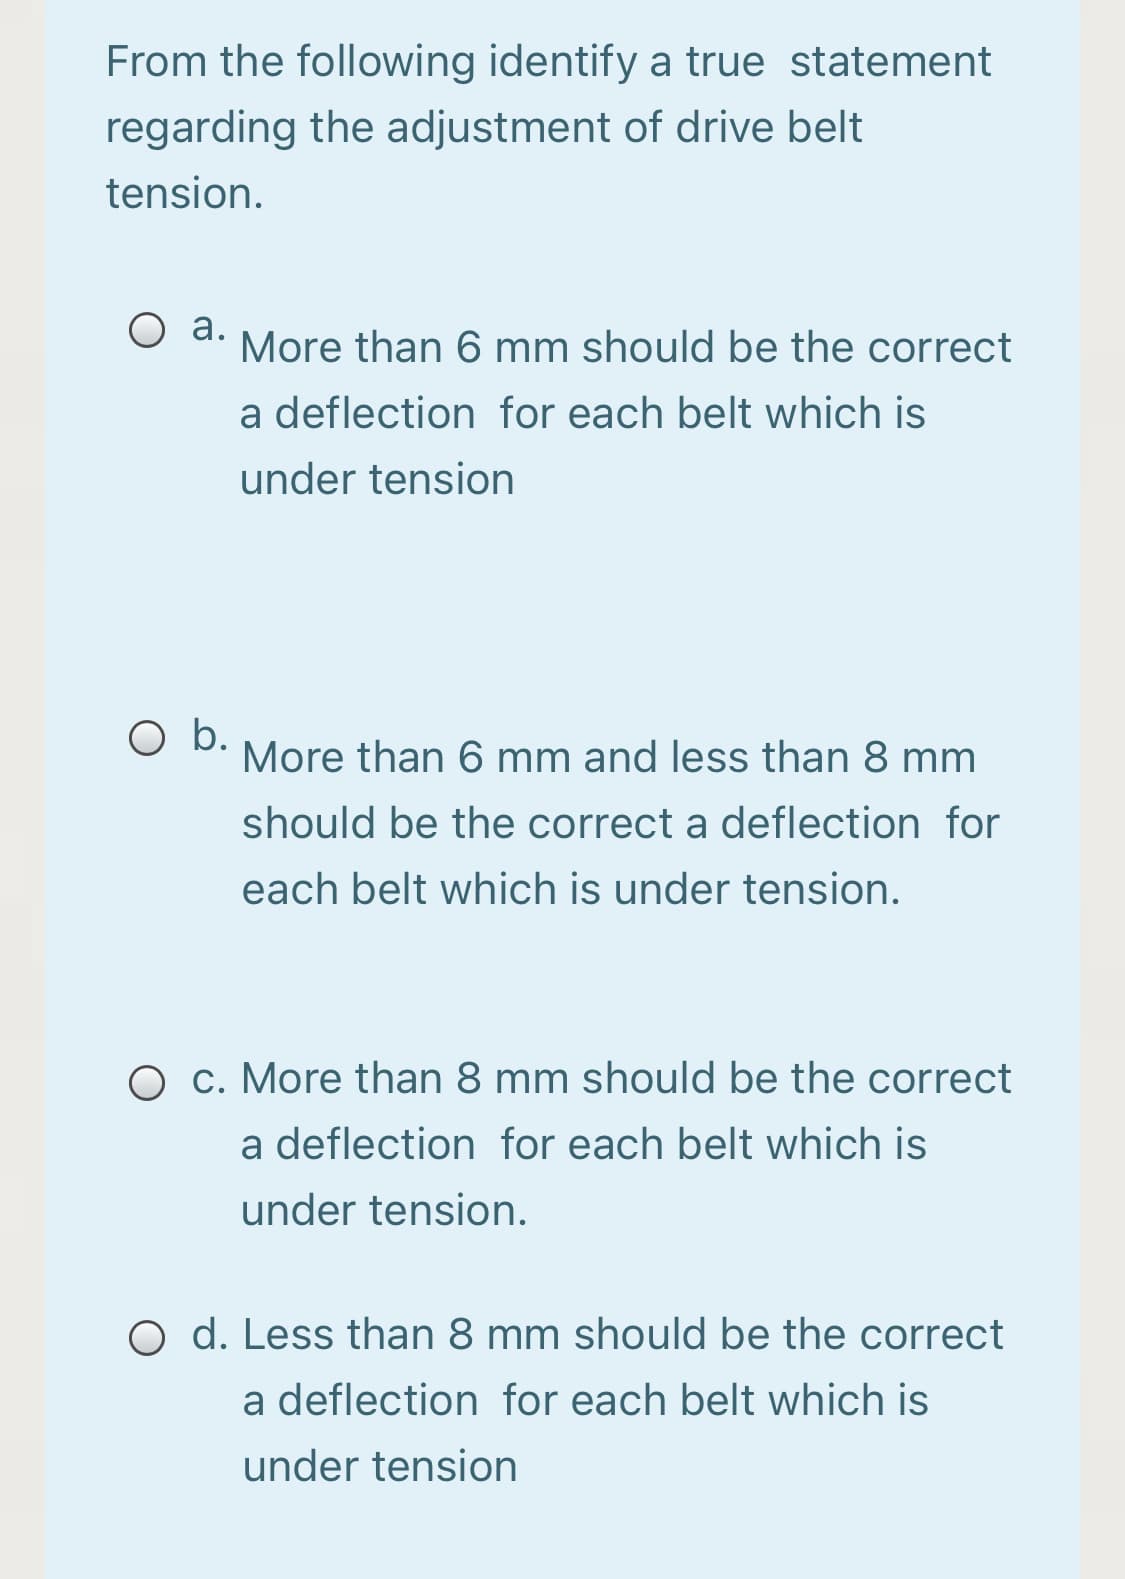 From the following identify a true statement
regarding the adjustment of drive belt
tension.
а.
More than 6 mm should be the correct
a deflection for each belt which is
under tension
O b.
More than 6 mm and less than 8 mm
should be the correct a deflection for
each belt which is under tension.
c. More than 8 mm should be the correct
a deflection for each belt which is
under tension.
O d. Less than 8 mm should be the correct
a deflection for each belt which is
under tension
